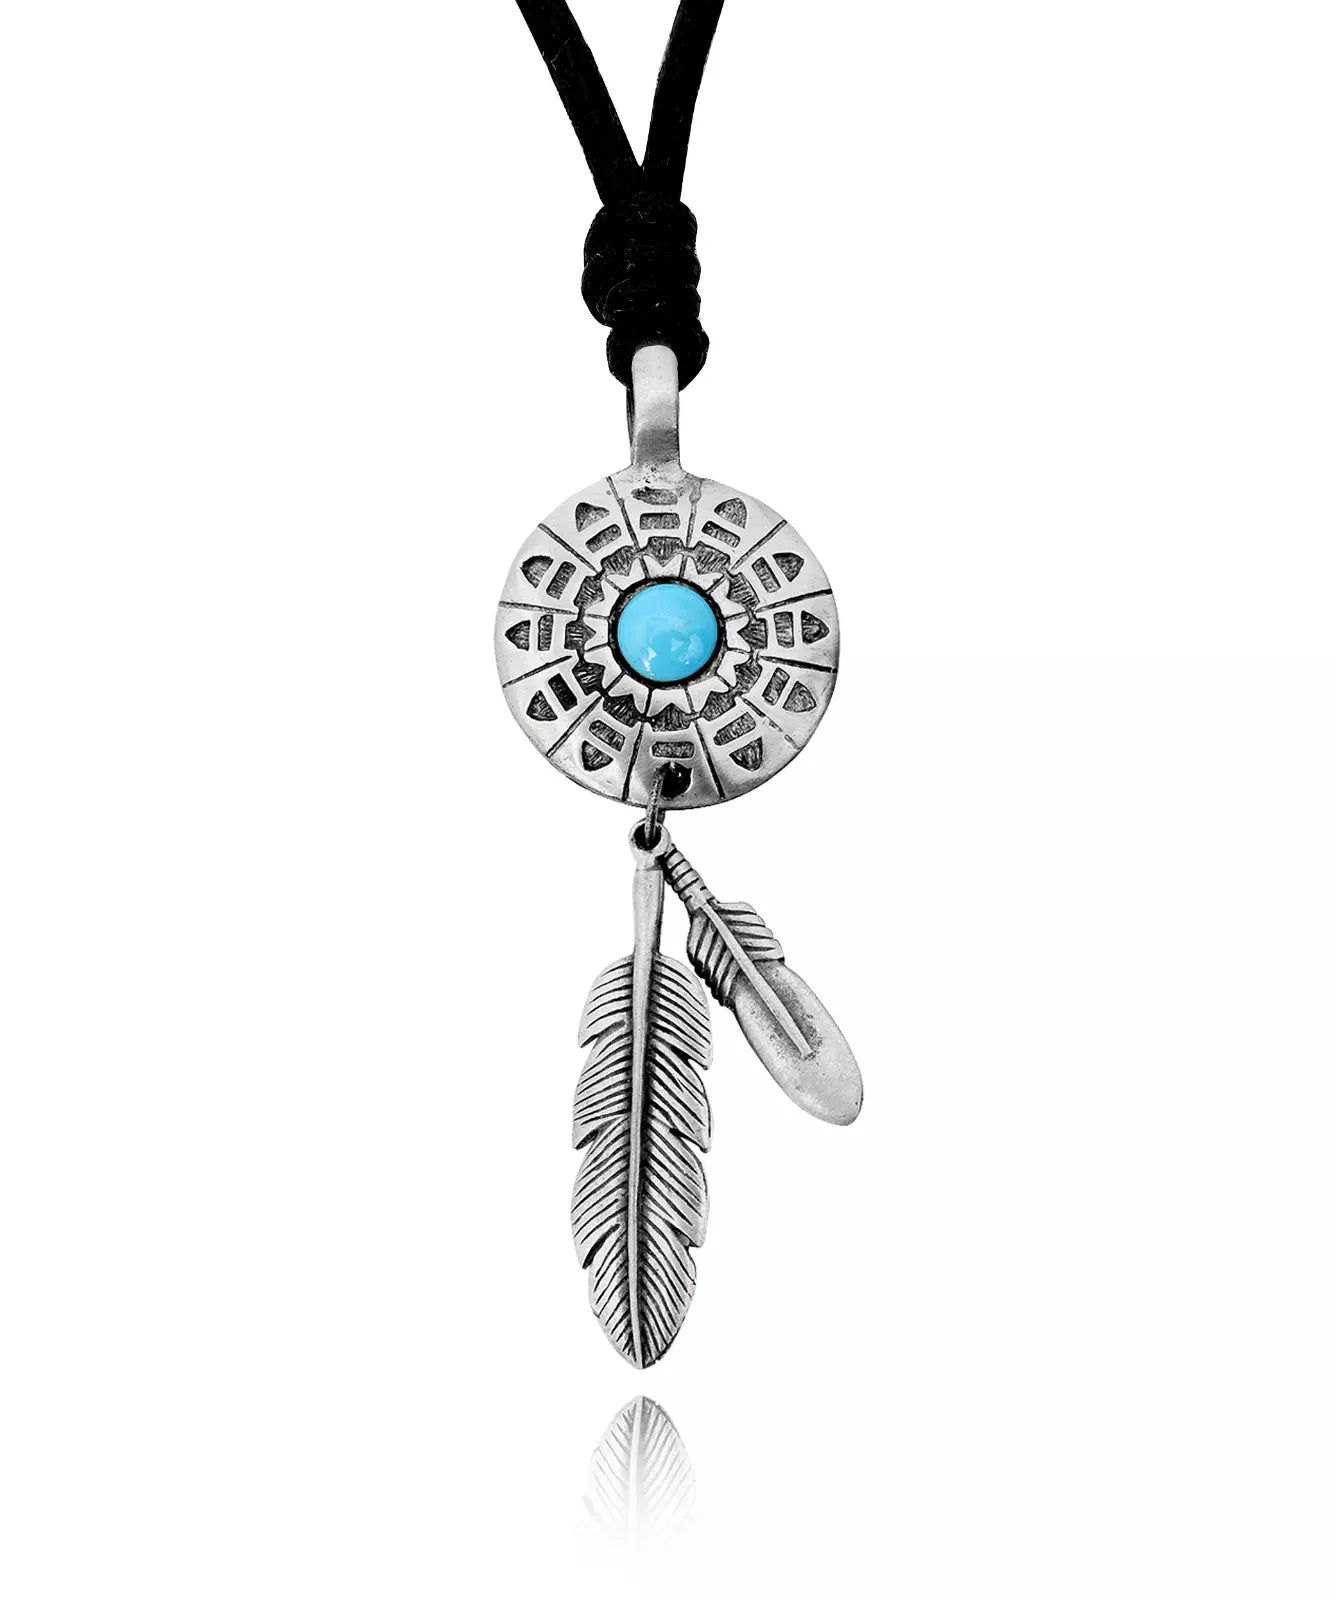 Lovely Native American Indian Silver Pewter Charm Necklace Pendant Jewelry